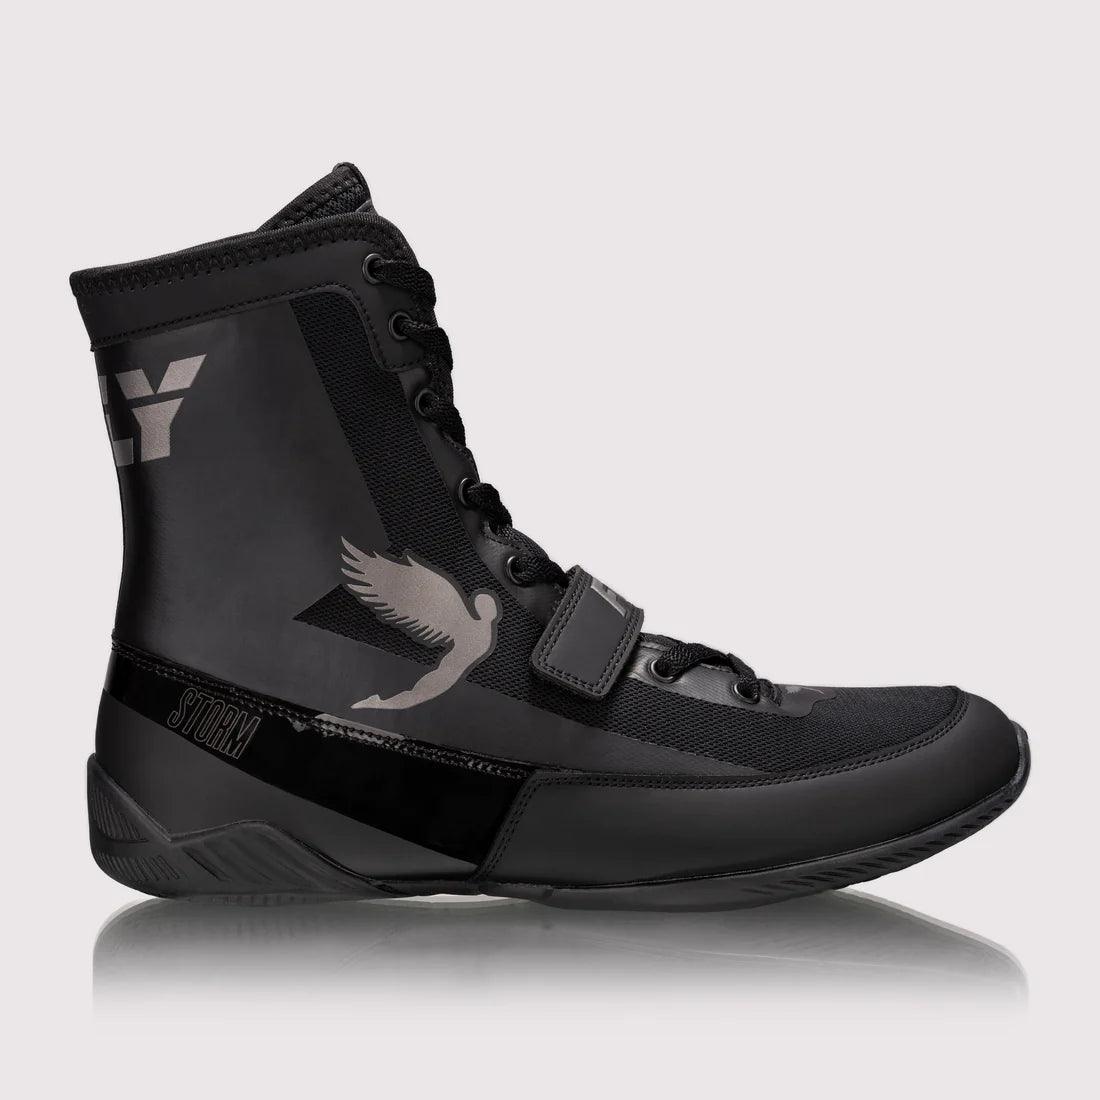 Fly Storm Boxing Boots Black,  best boxing boots,  junior boxing boots,  mens boxing boots,  black boxing boots,  title boxing boots,  cheap boxing boots,  leather boxing boots,  fly boxing boots,  boxing boots,  shoes black,  Ringmaster Sports equipment,  Ringmaster Boxing equipment,  Ringmaster Boxing gloves, Ringmaster boxing boots,  Ringmaster boxing shoes 